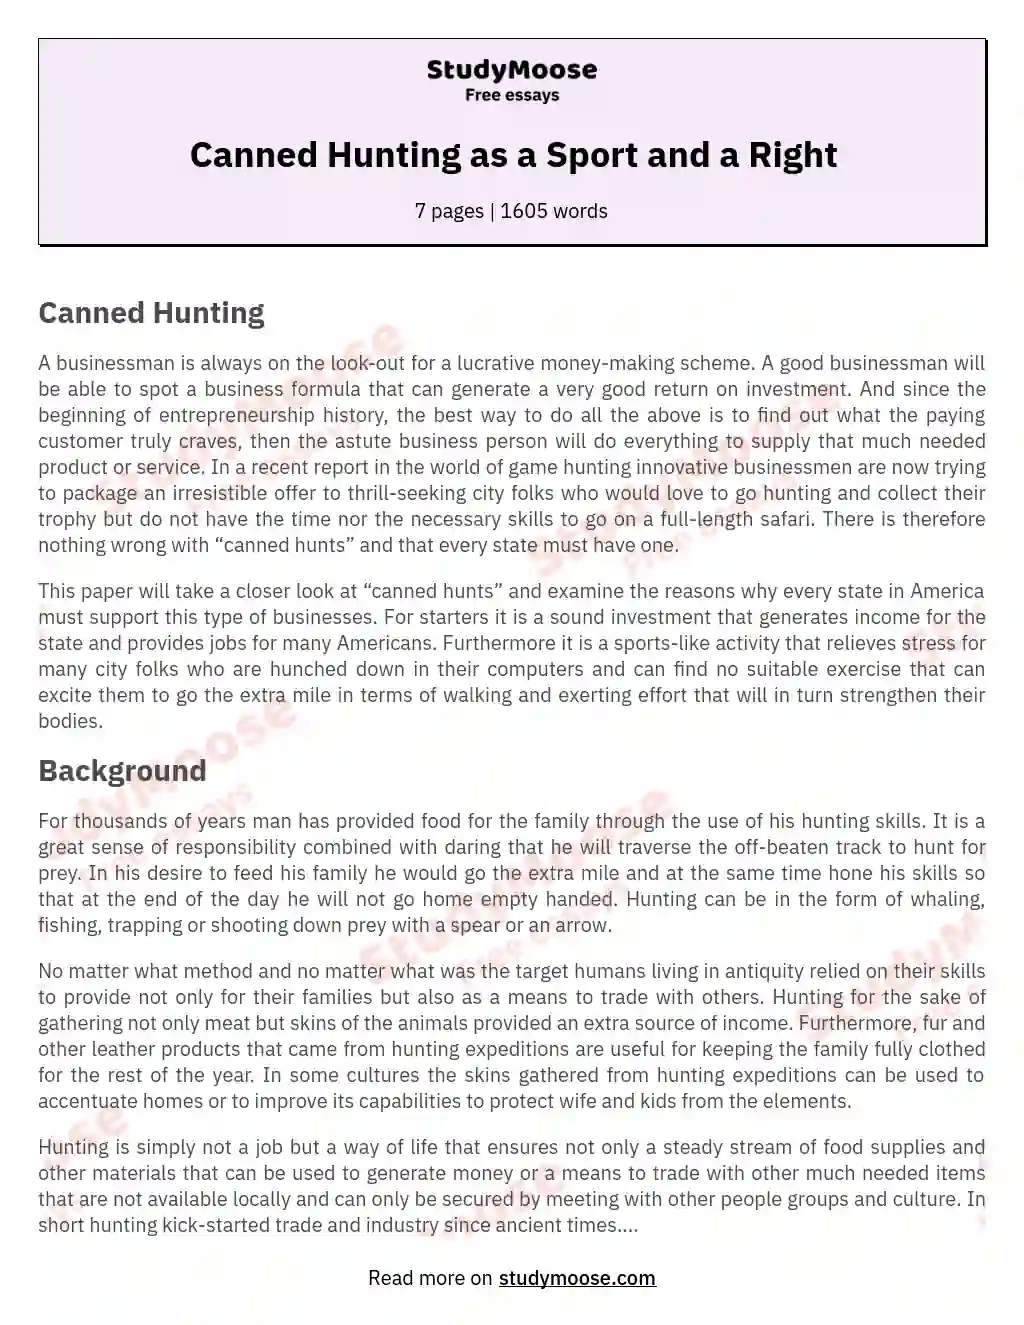 Canned Hunting as a Sport and a Right